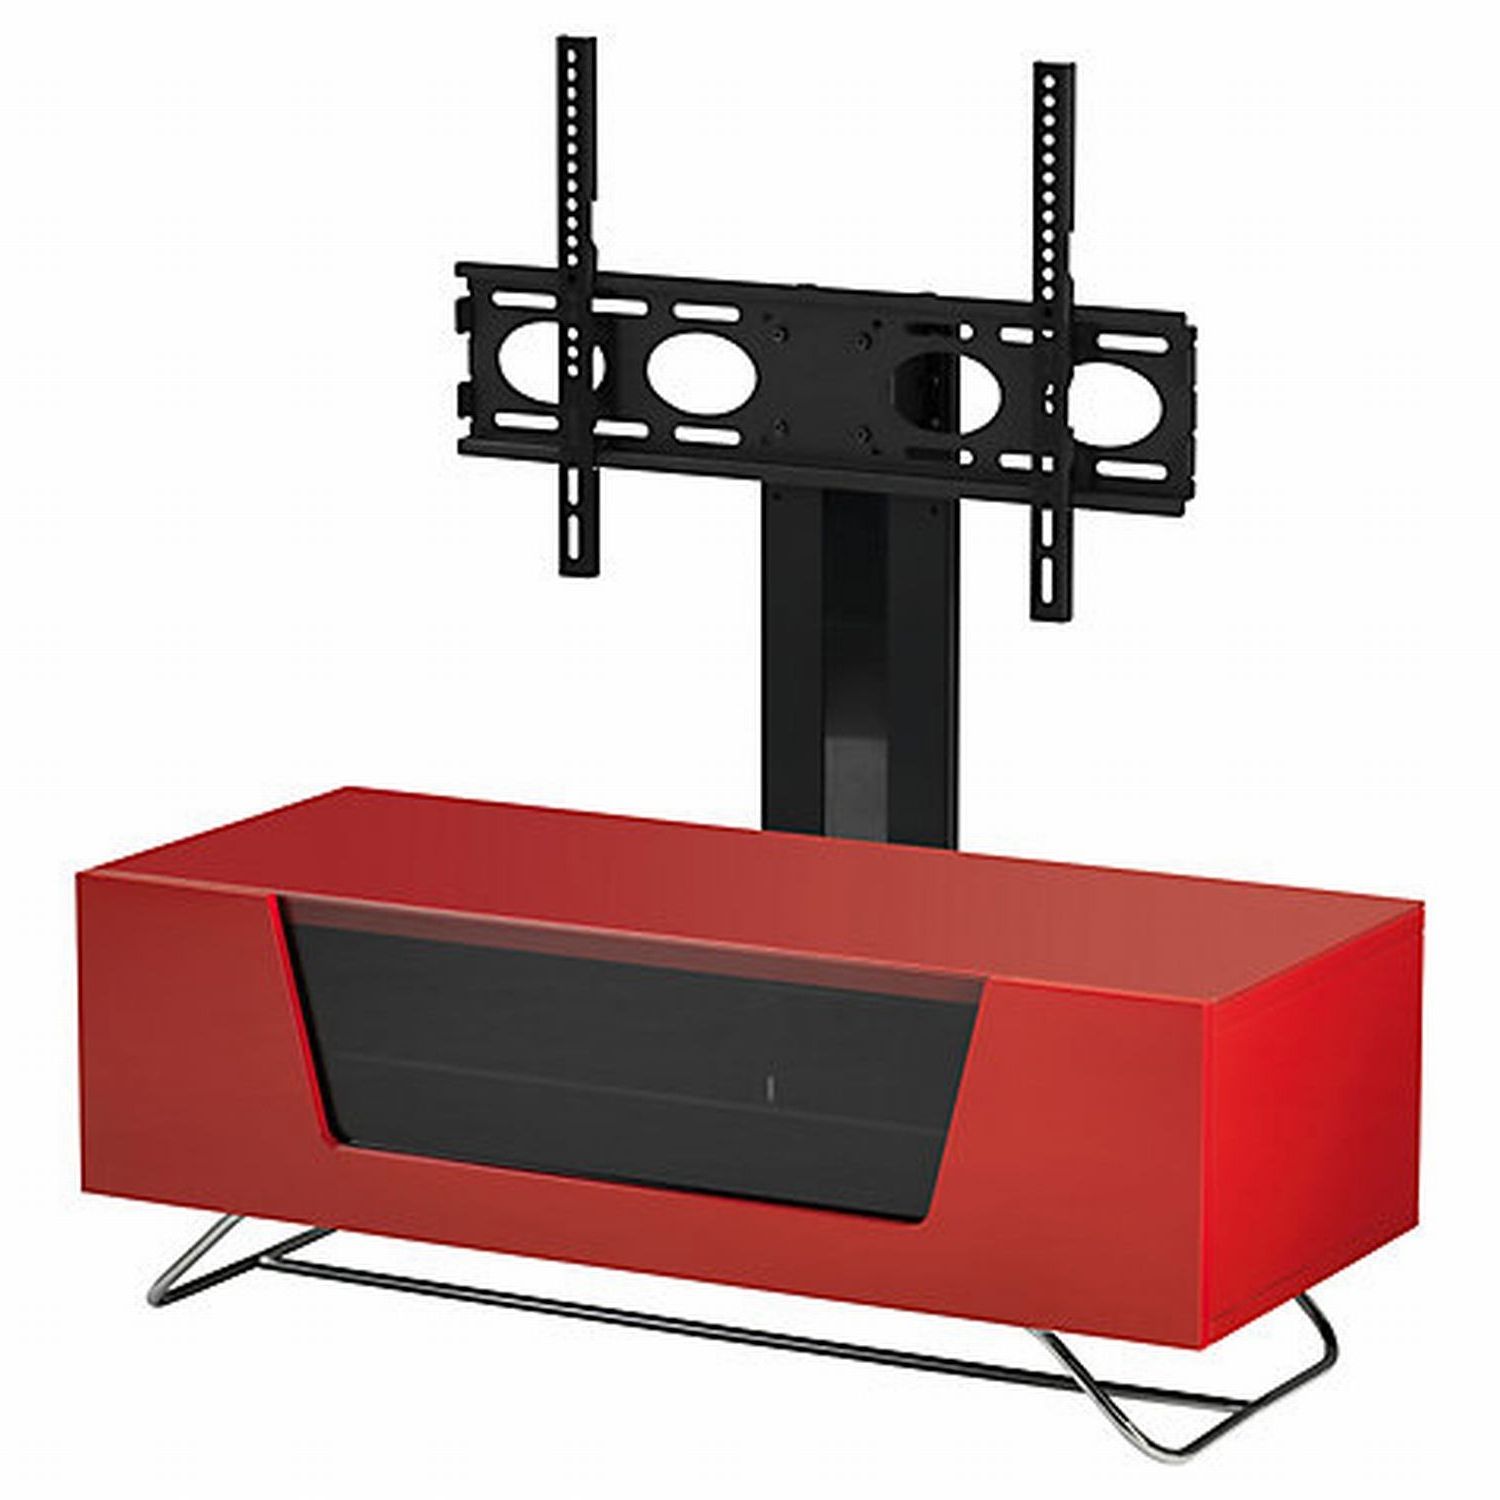 Cheap Cantilever Tv Stands Pertaining To Newest Casa Chromium Cantilever Hg Red Tv Stand (View 9 of 20)